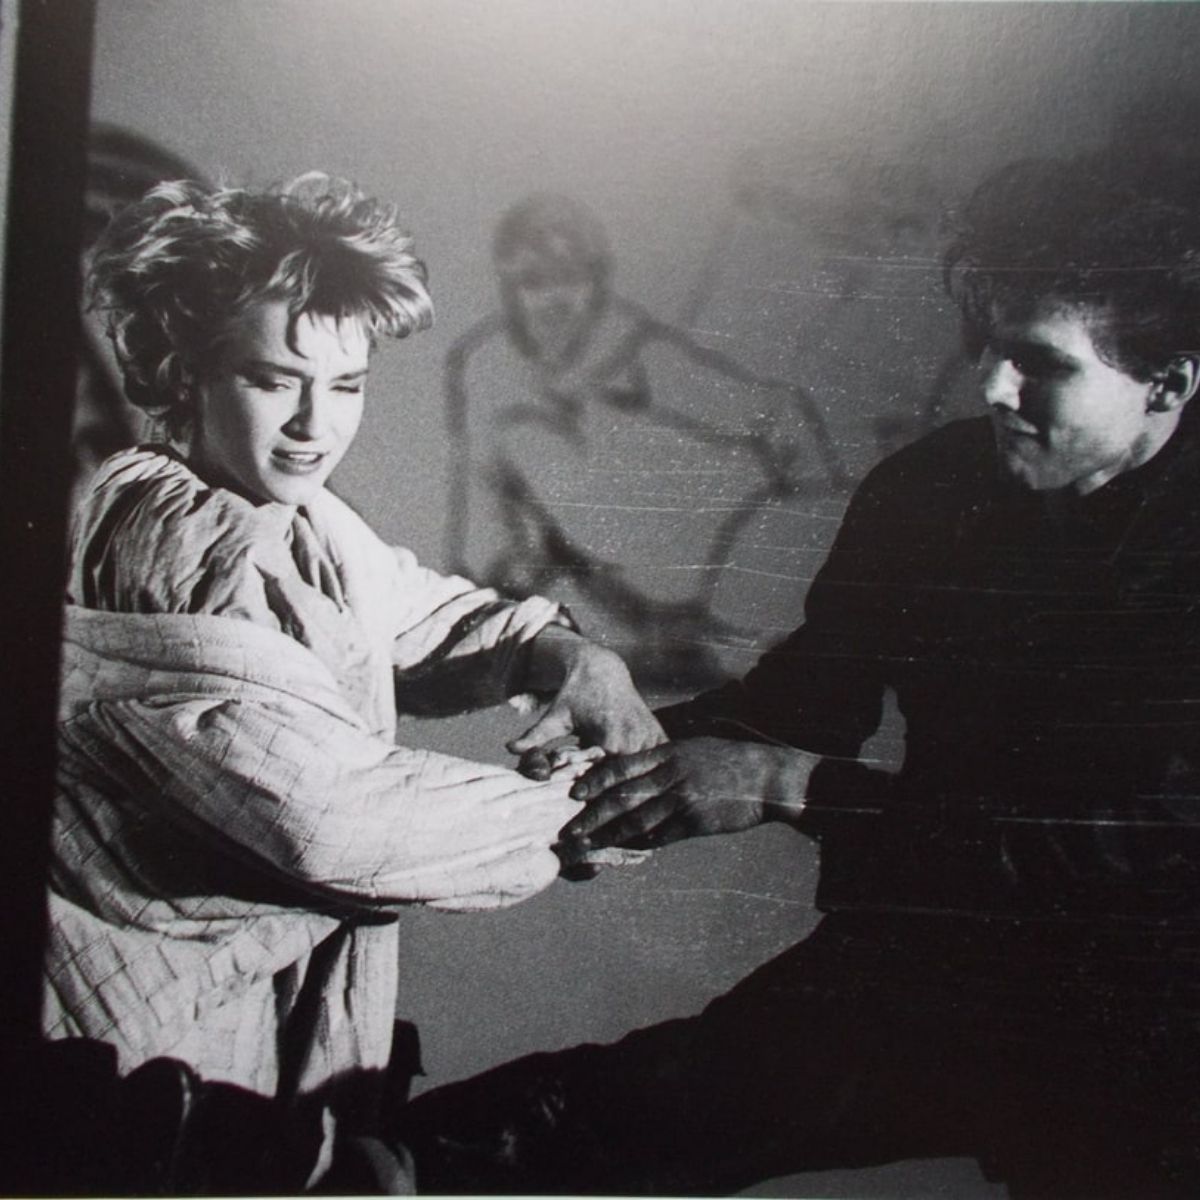 Bunty Bailey and Morten Harket on the set of A-ha's "Take On Me" video